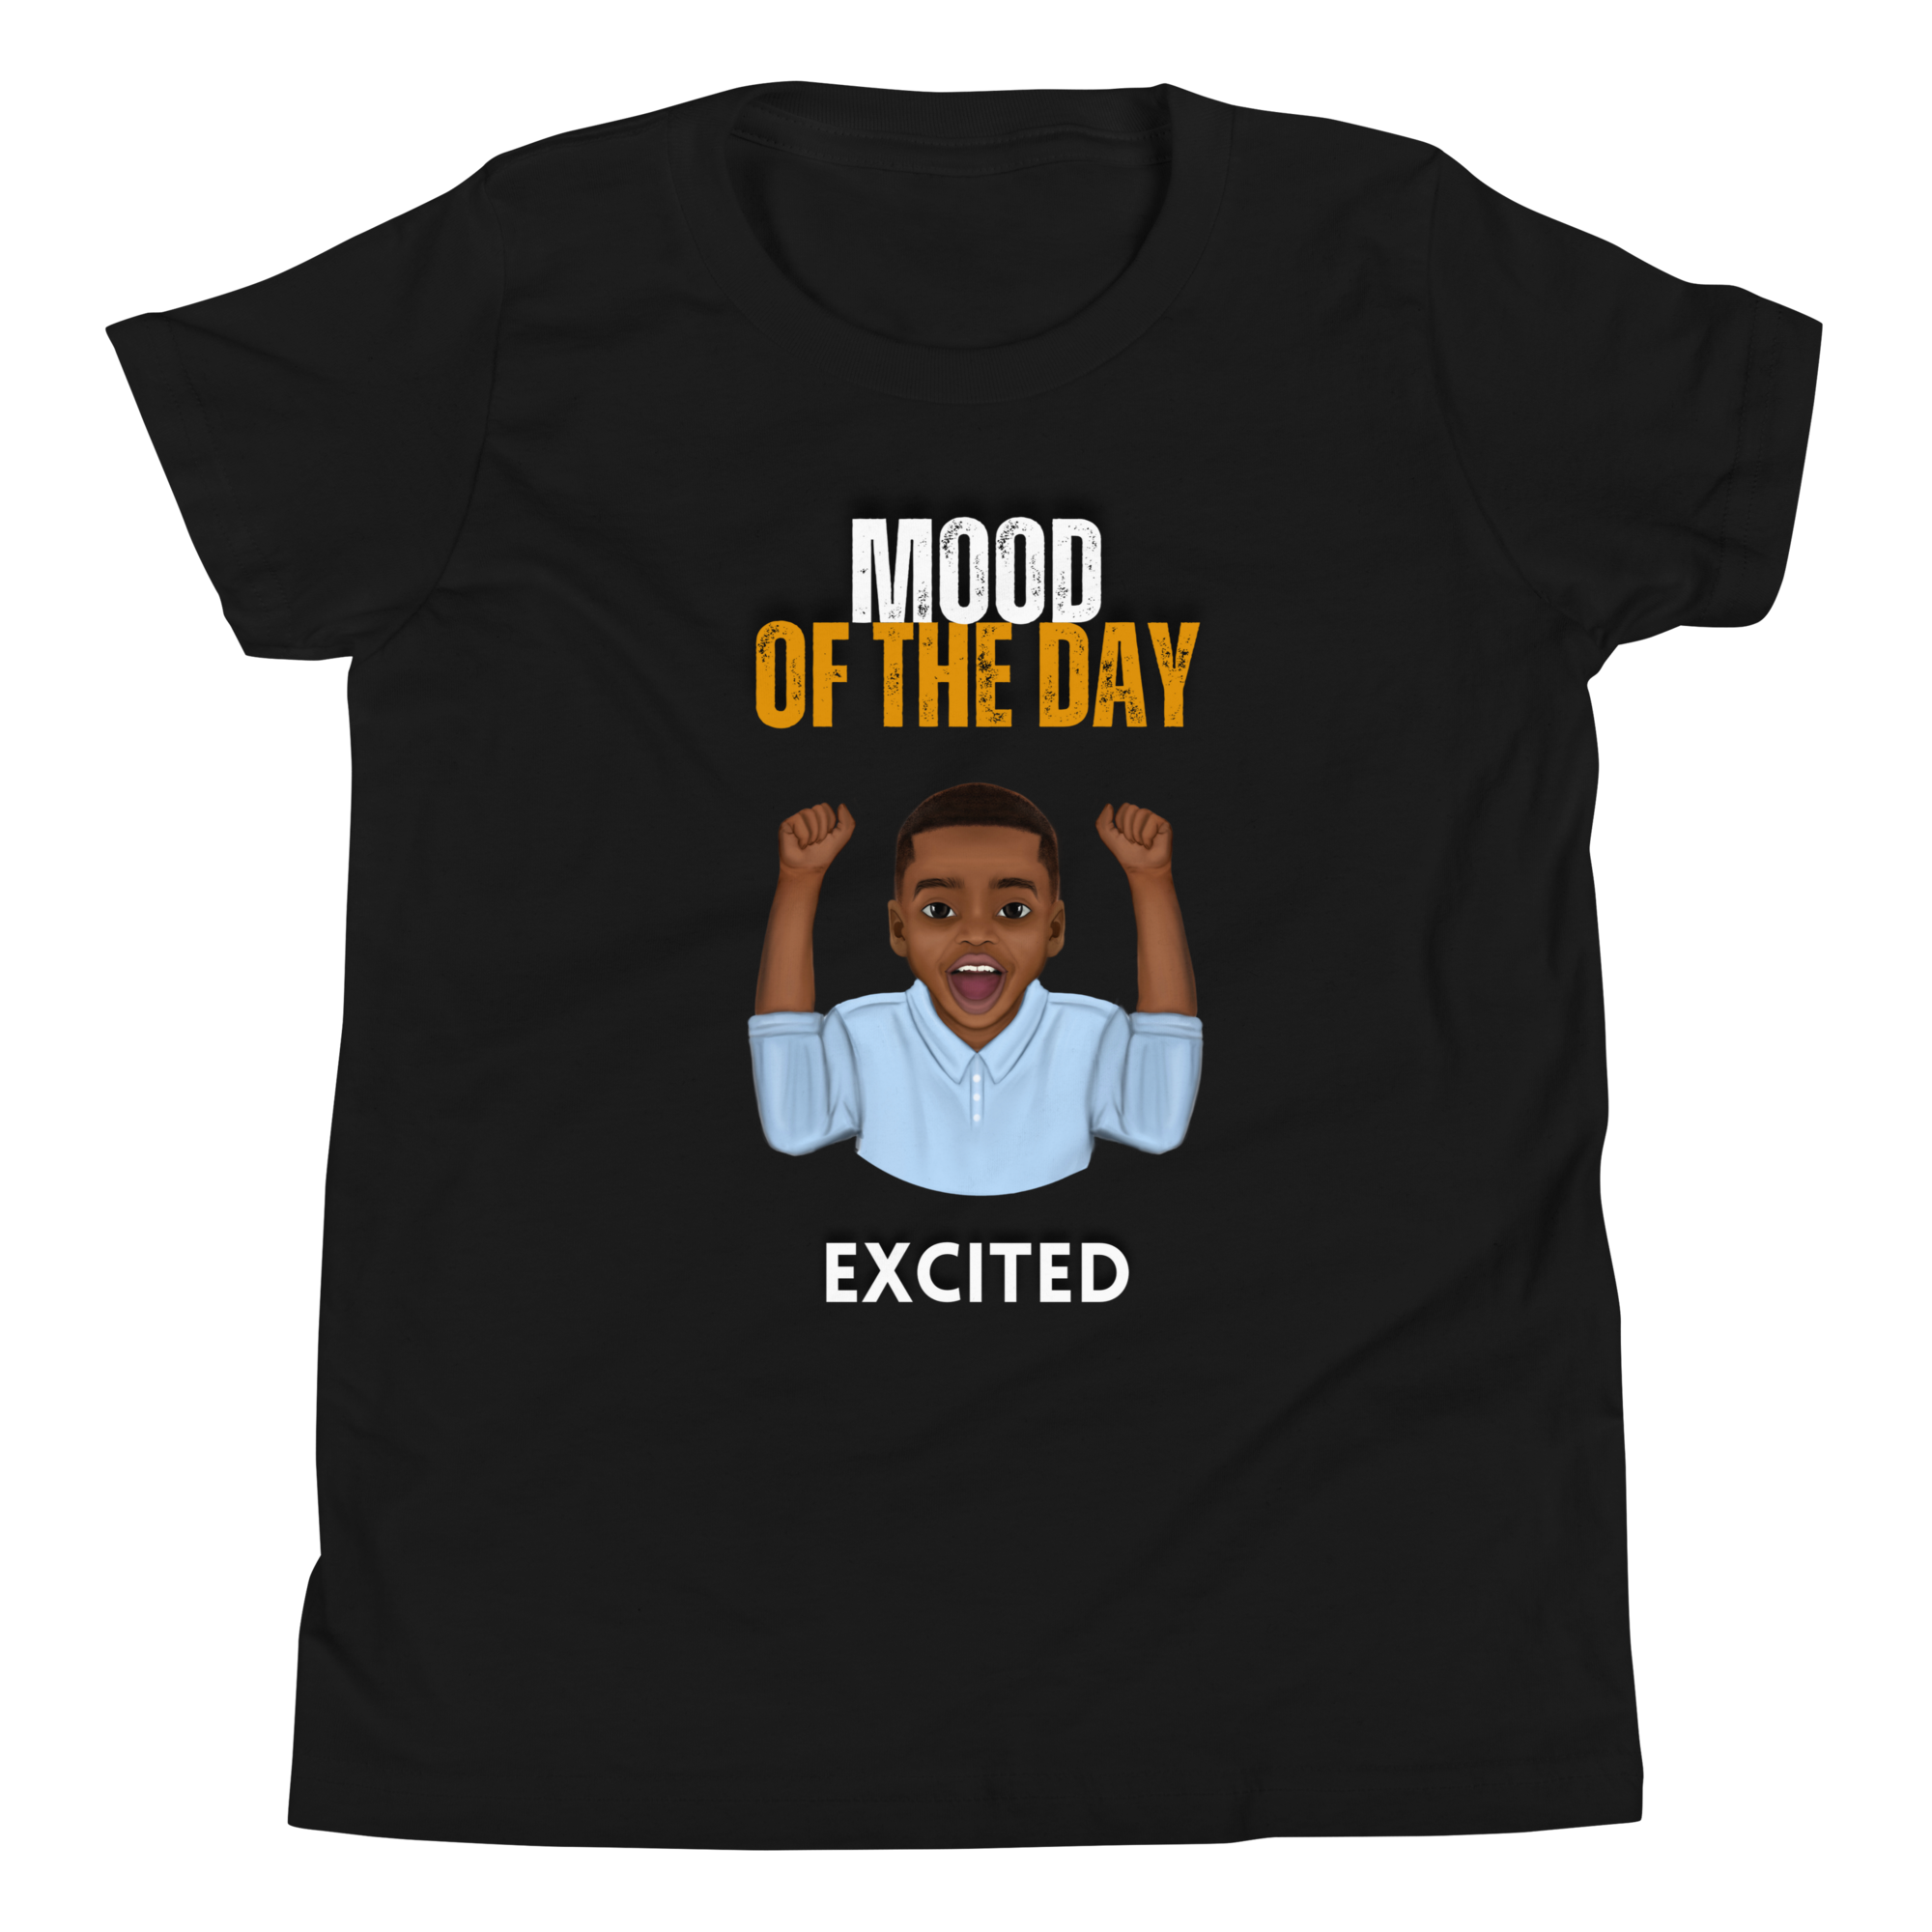 Youth Mood of the Day T-shirt - Excited